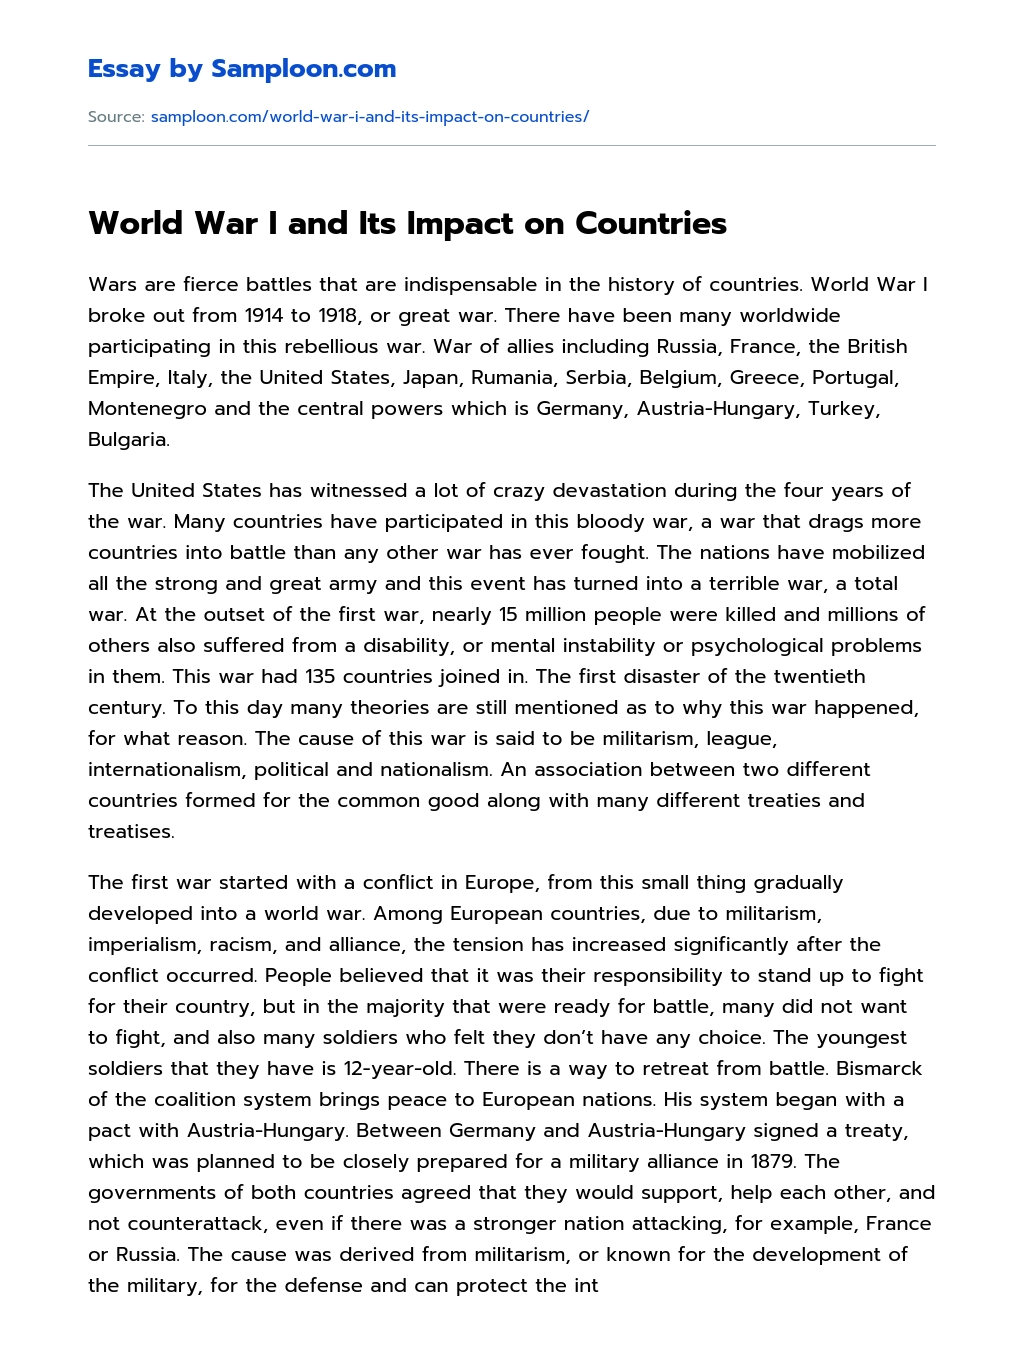 World War I and Its Impact on Countries essay